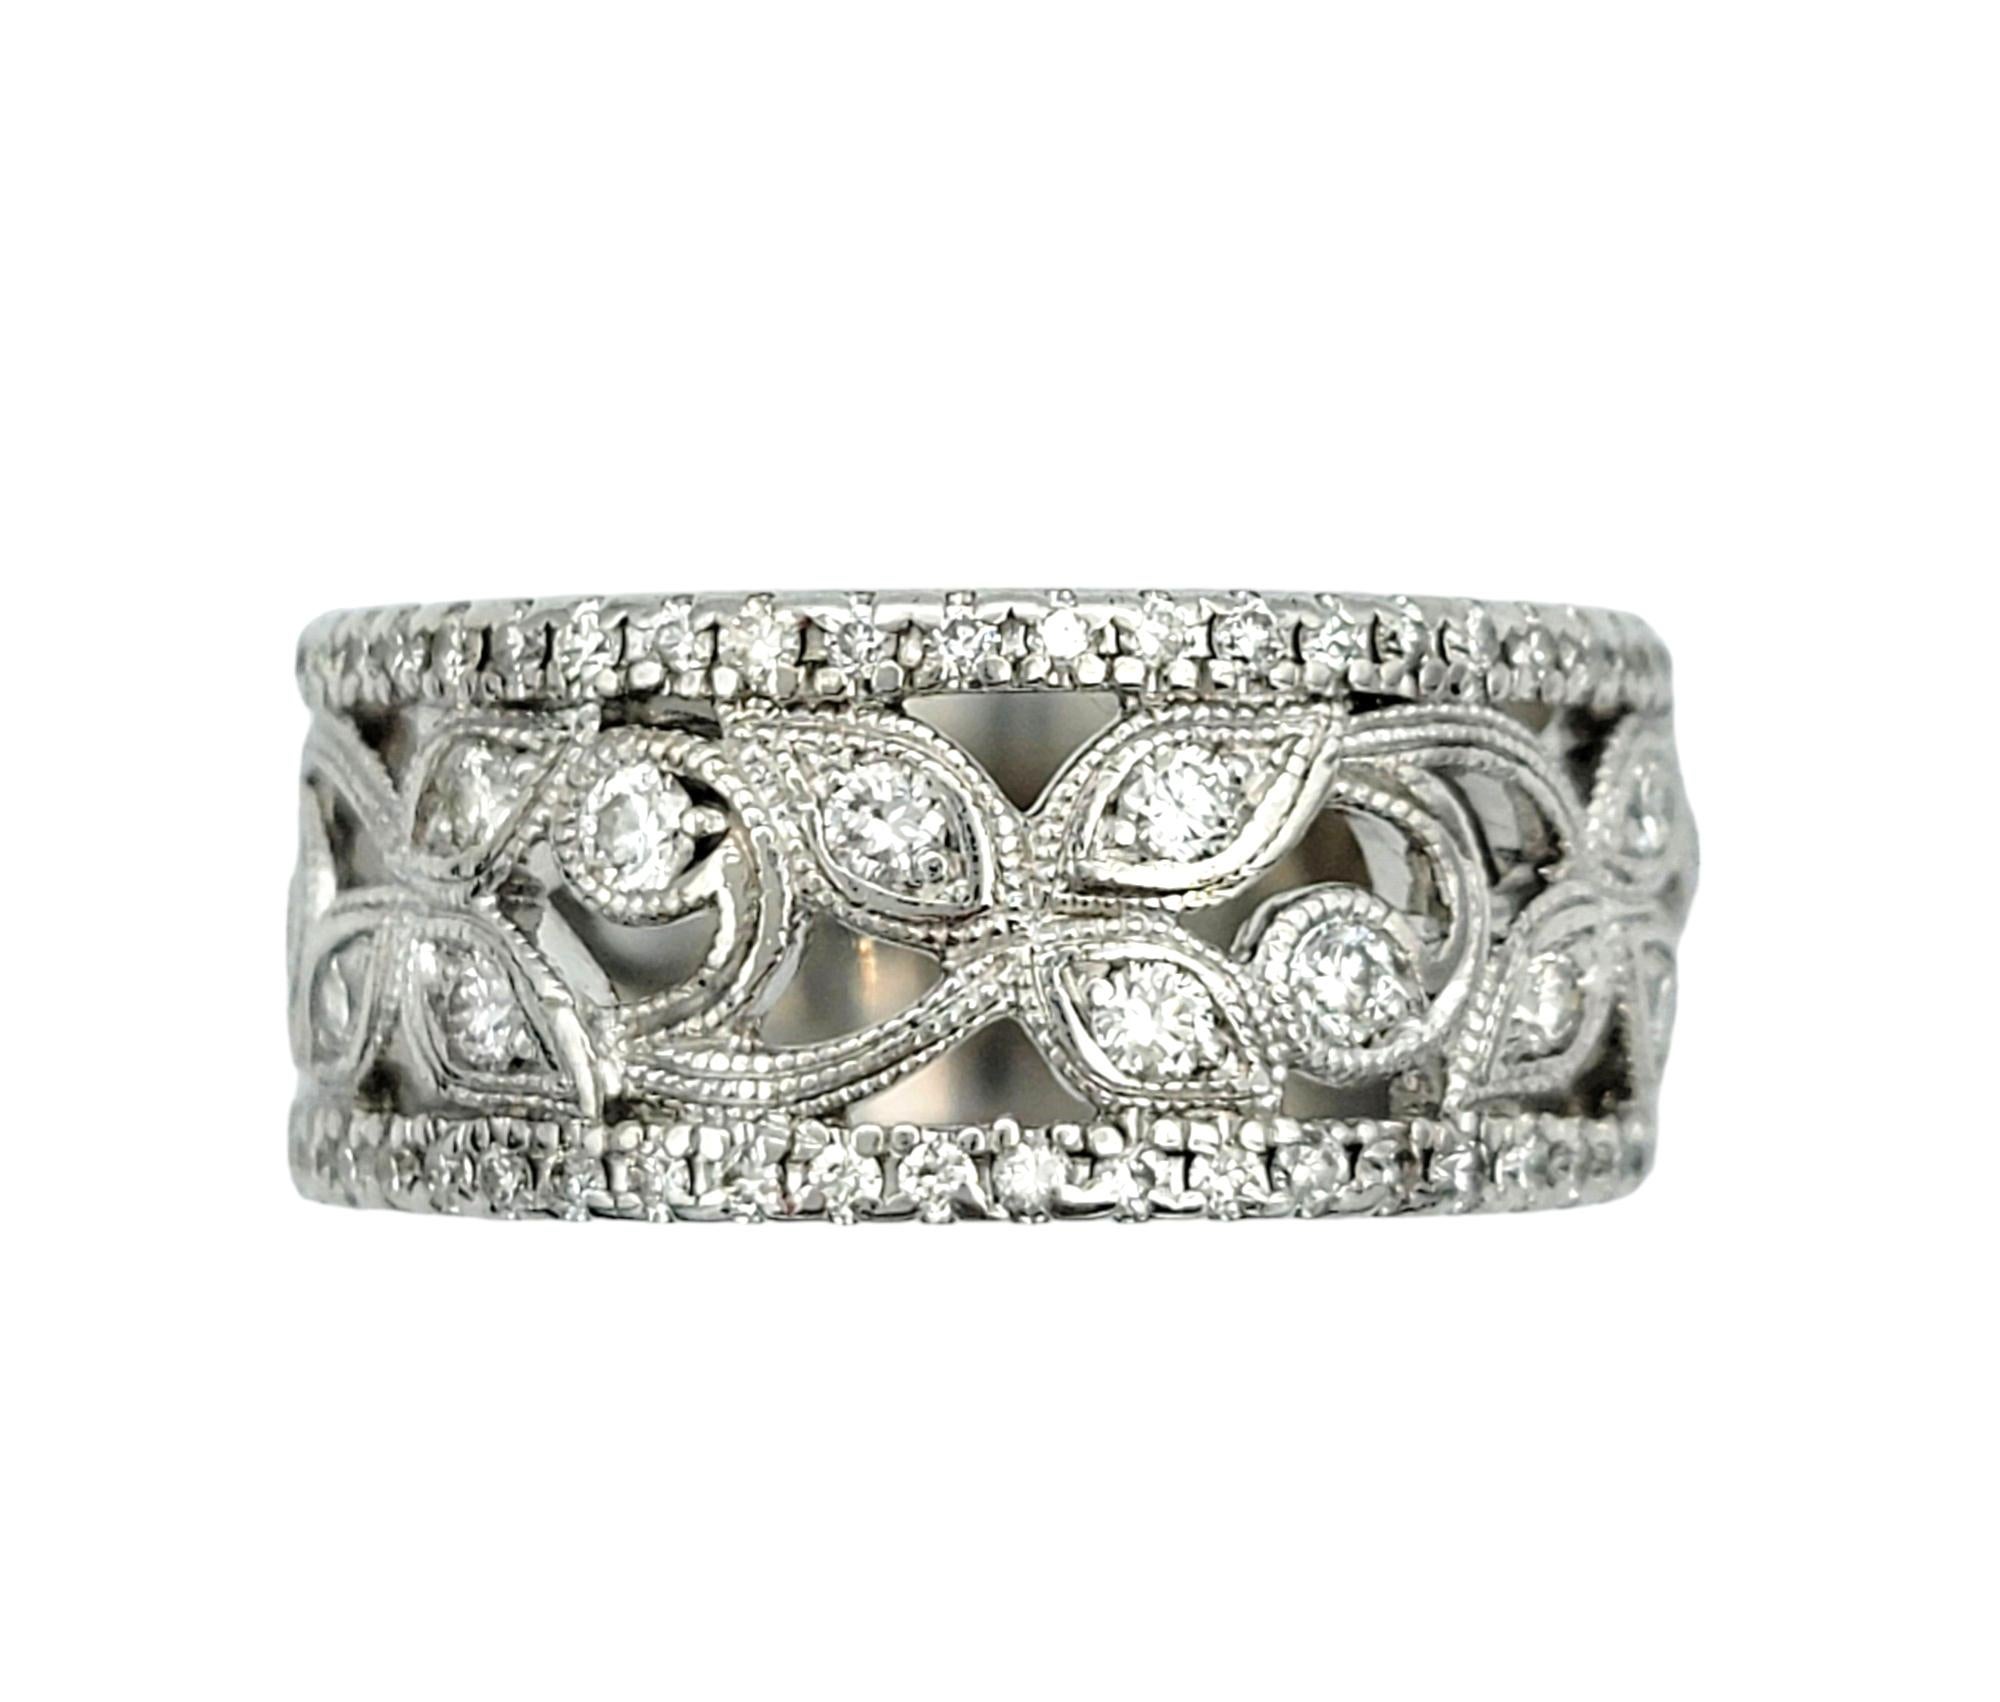 Ring Size: 6.5

Crafted by the renowned designer, Neil Lane, this exquisite diamond band ring showcases a delicate yet captivating design in lustrous 14 karat white gold. The band features a whimsical cut-out leaf motif, adding a touch of